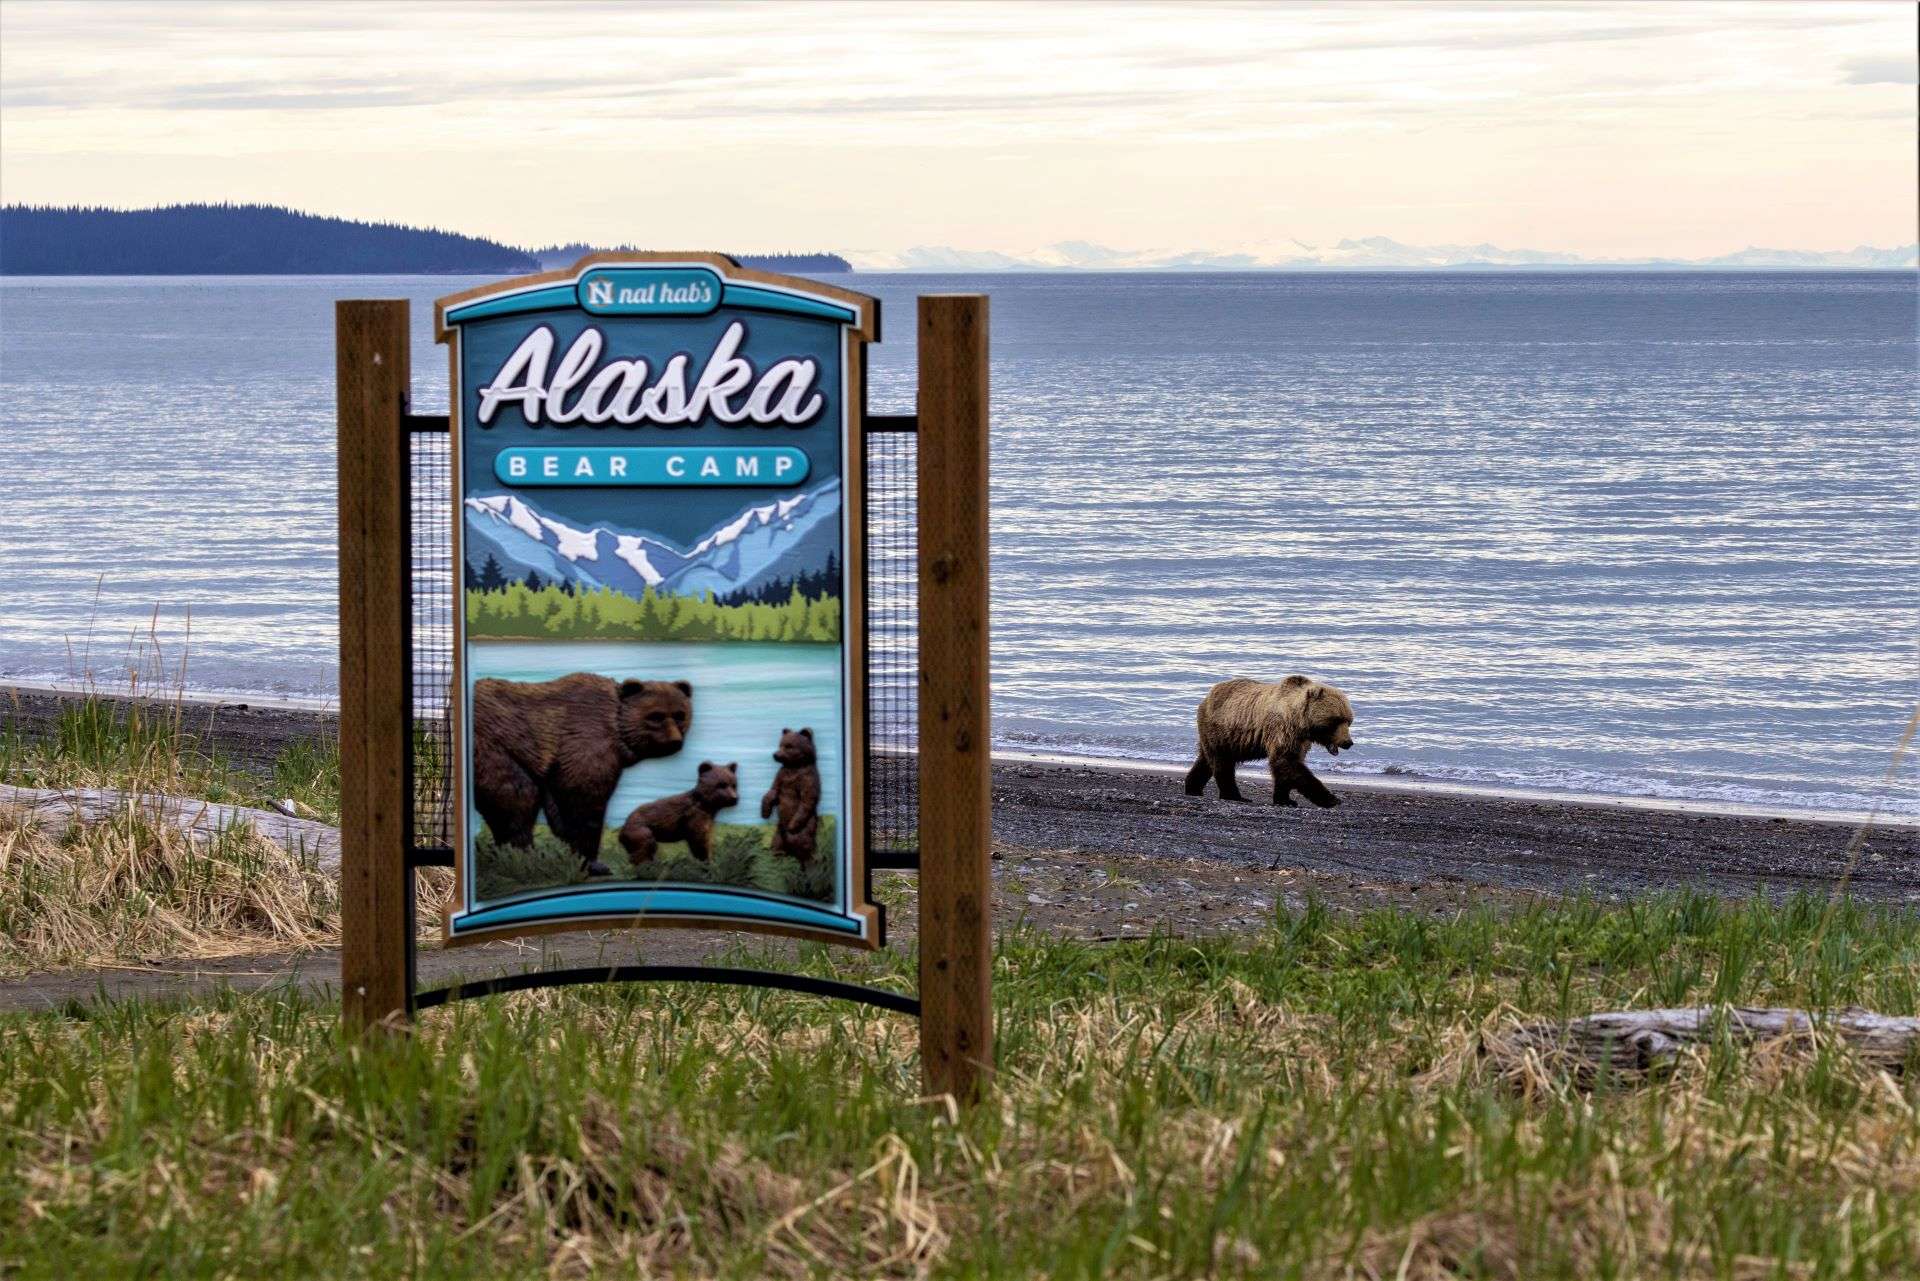 A bear walking passed the Alaska NatHab sign in front of the Bear camp.